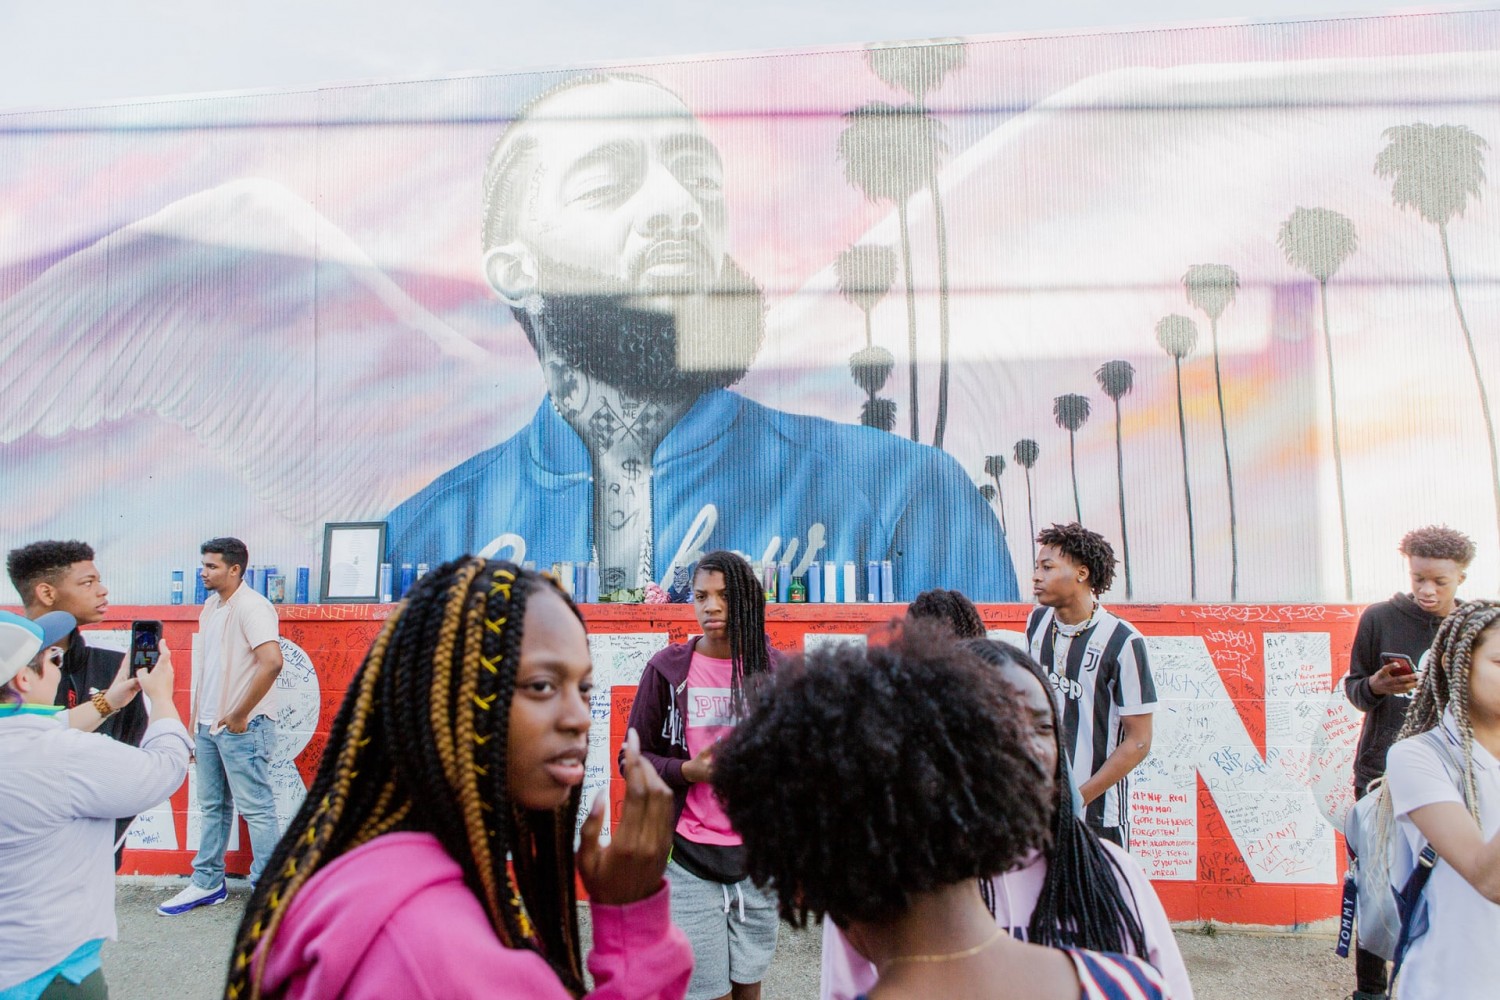 'This is historic': How Nipsey Hussle's death inspired peace talks among rival LA gangs